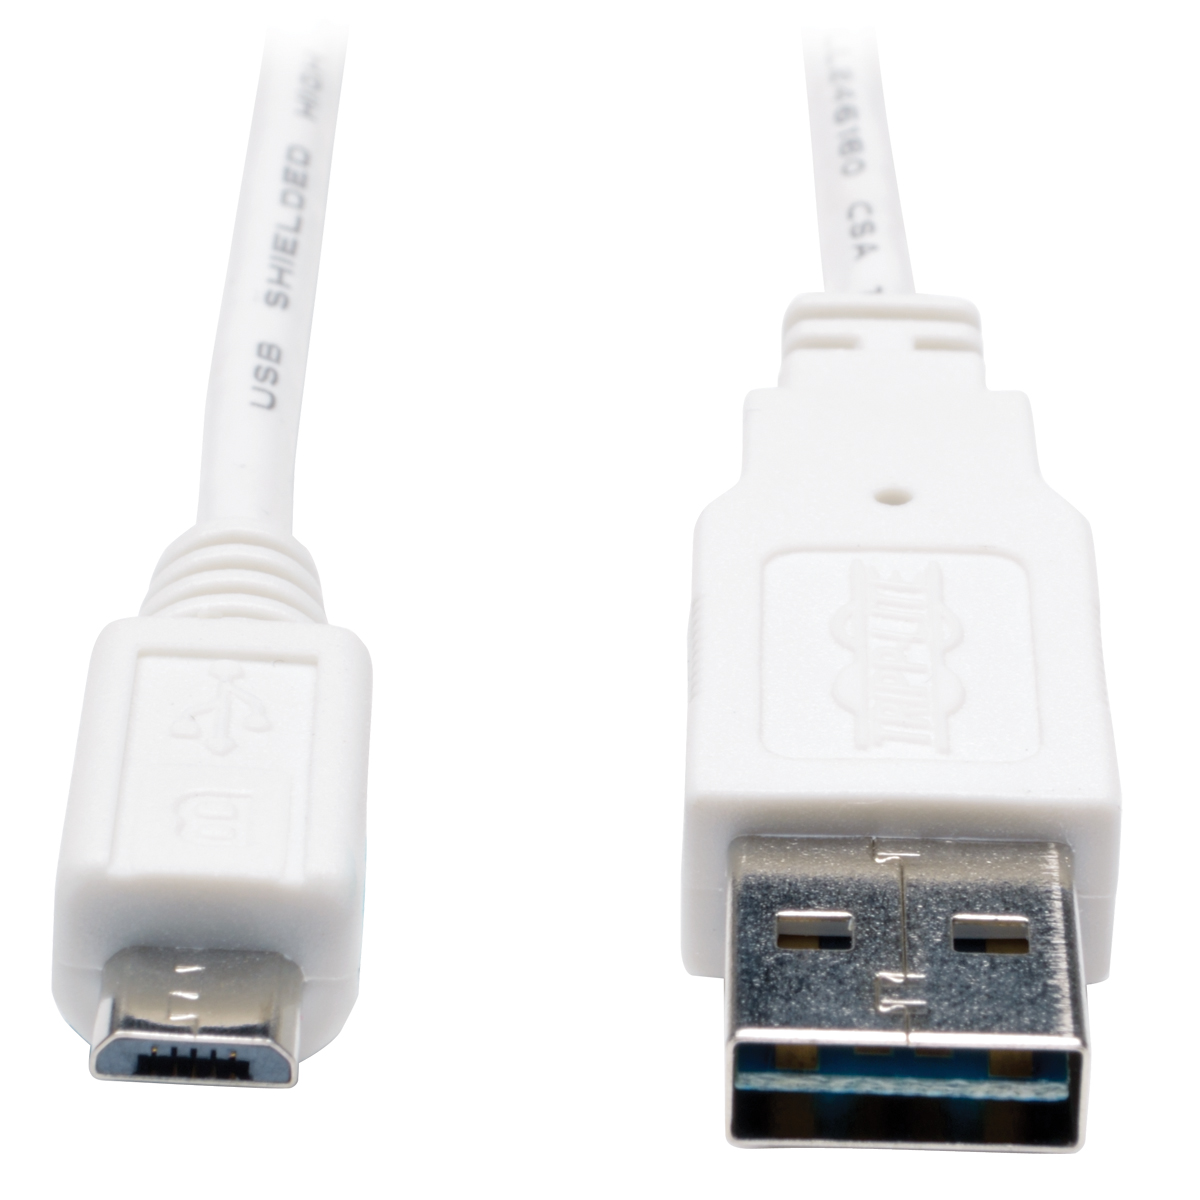 UR050-06N-WH USB Data Transfer/Power Cable - image 2 of 3